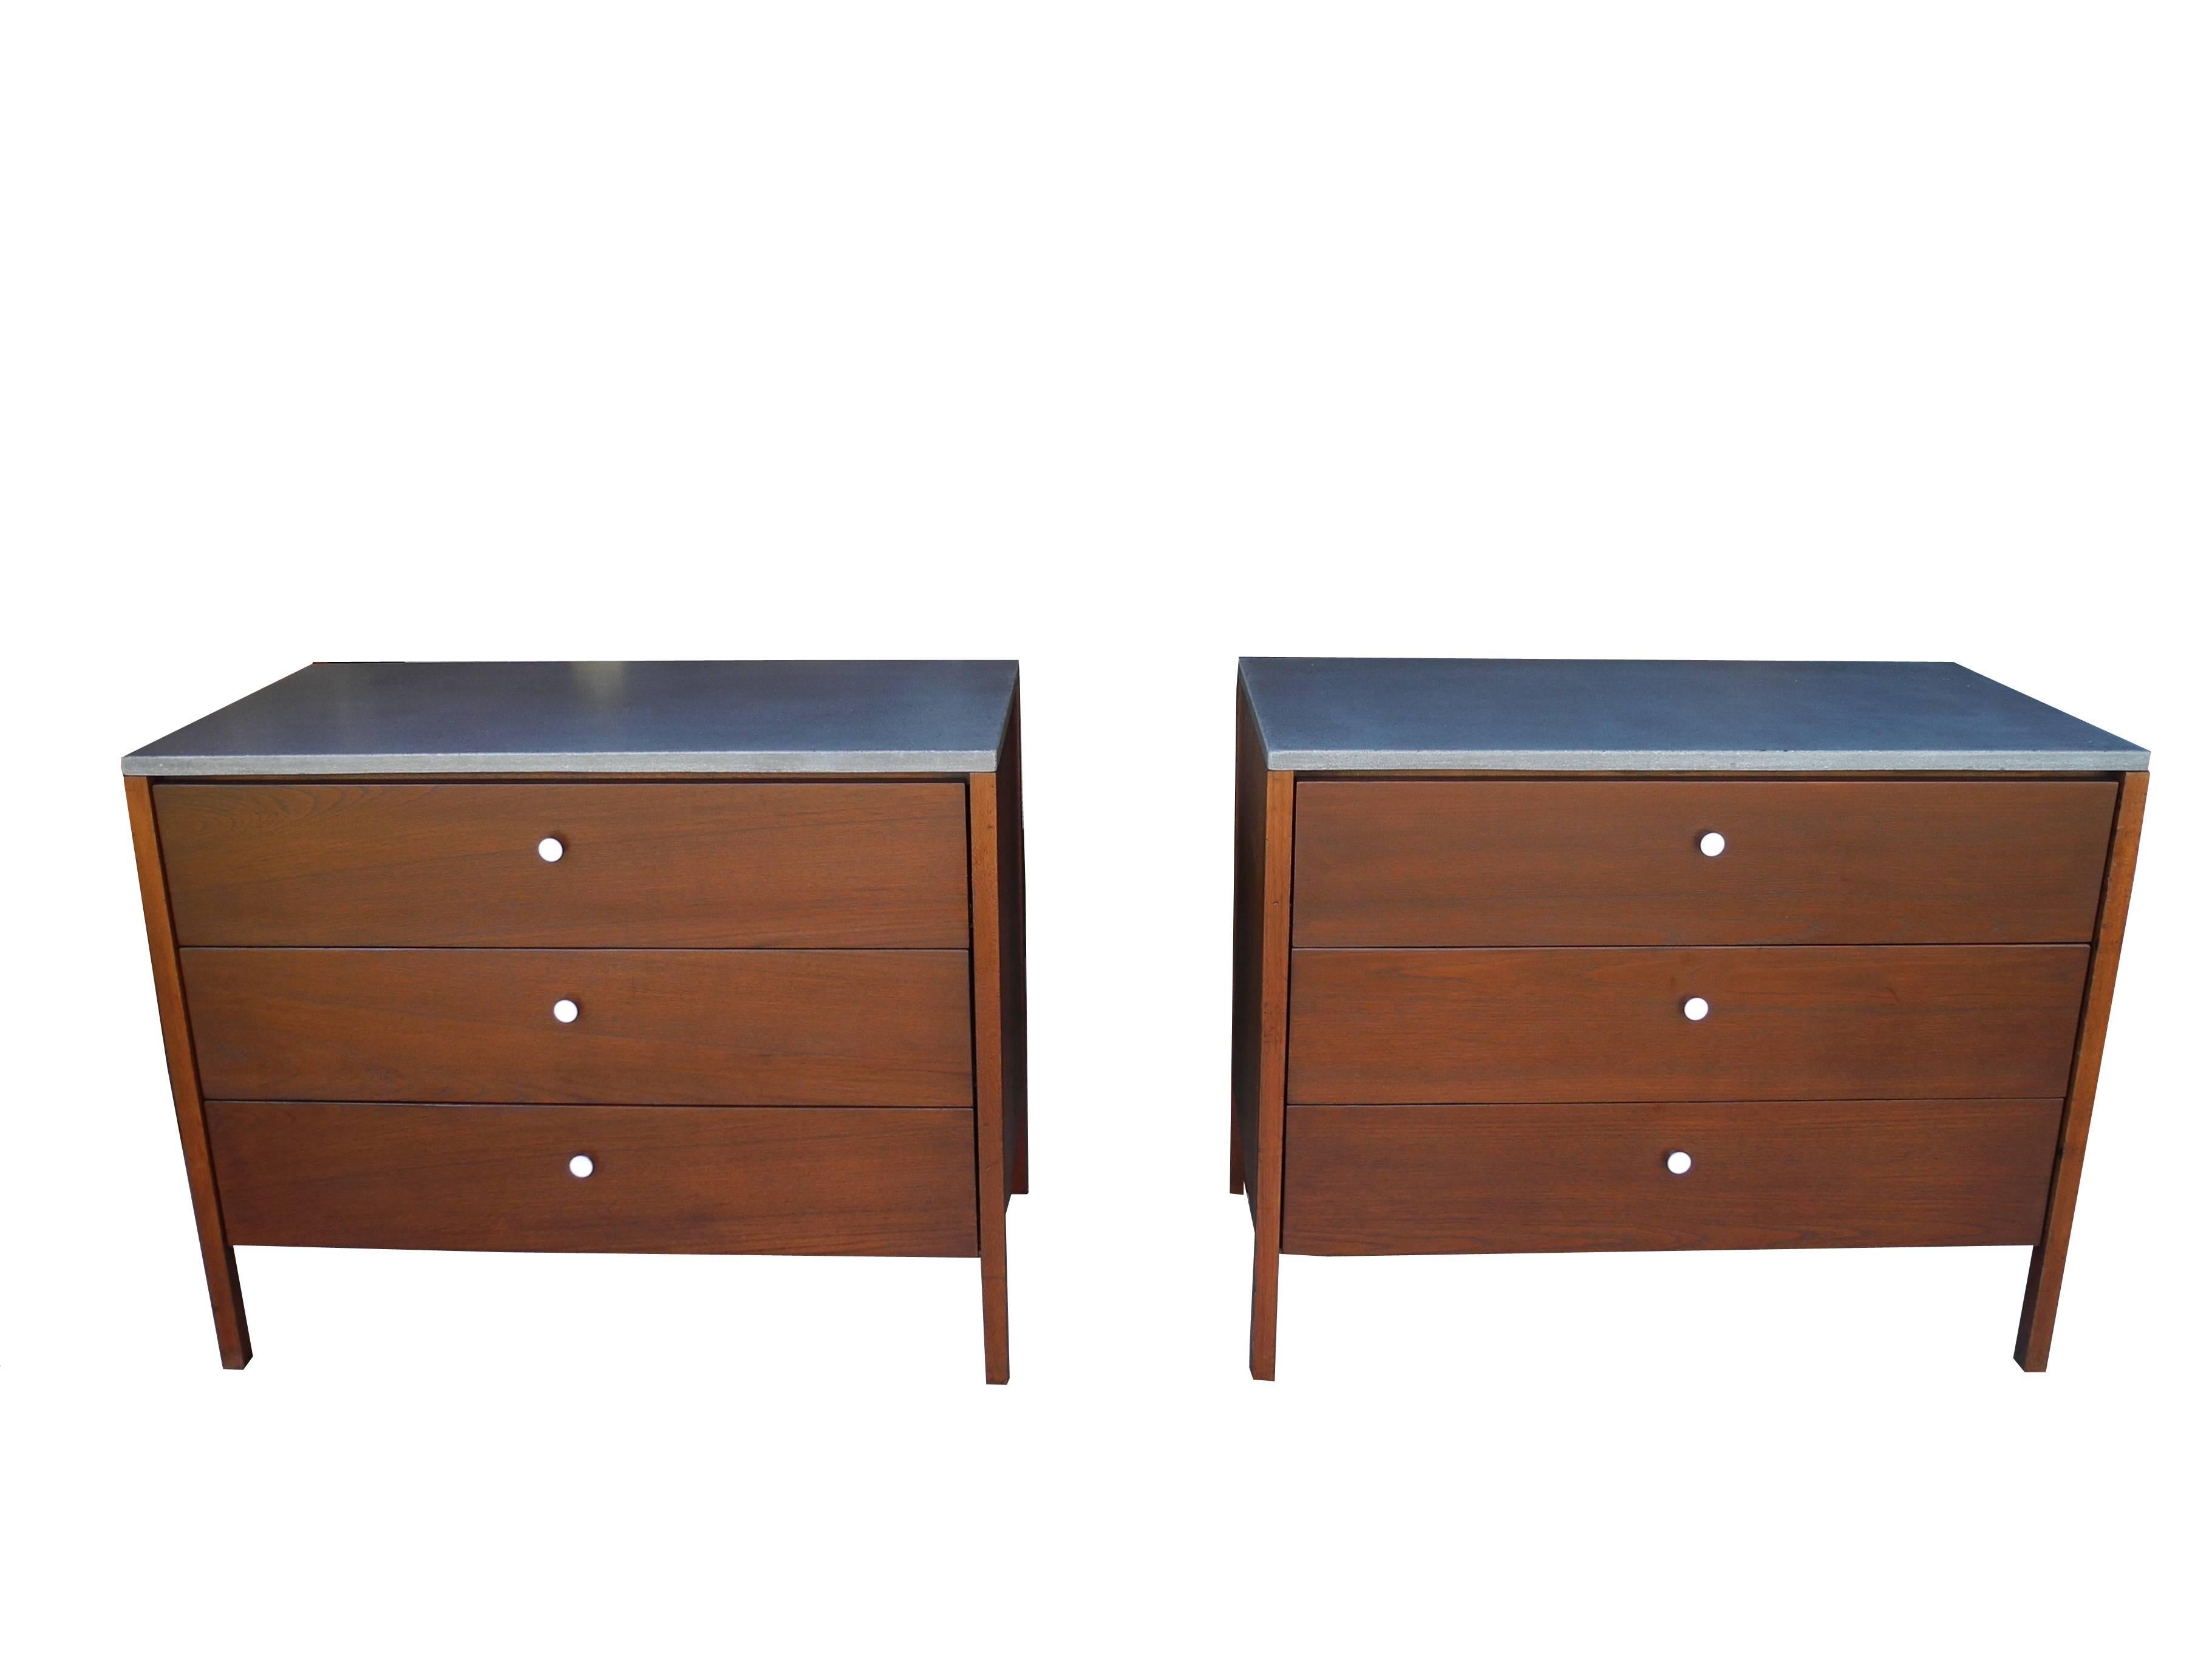 These dressers or nightstands are made of walnut with grey concrete tops and white metal pulls. The concrete is the color of slate (middle grey). A handsome combination.